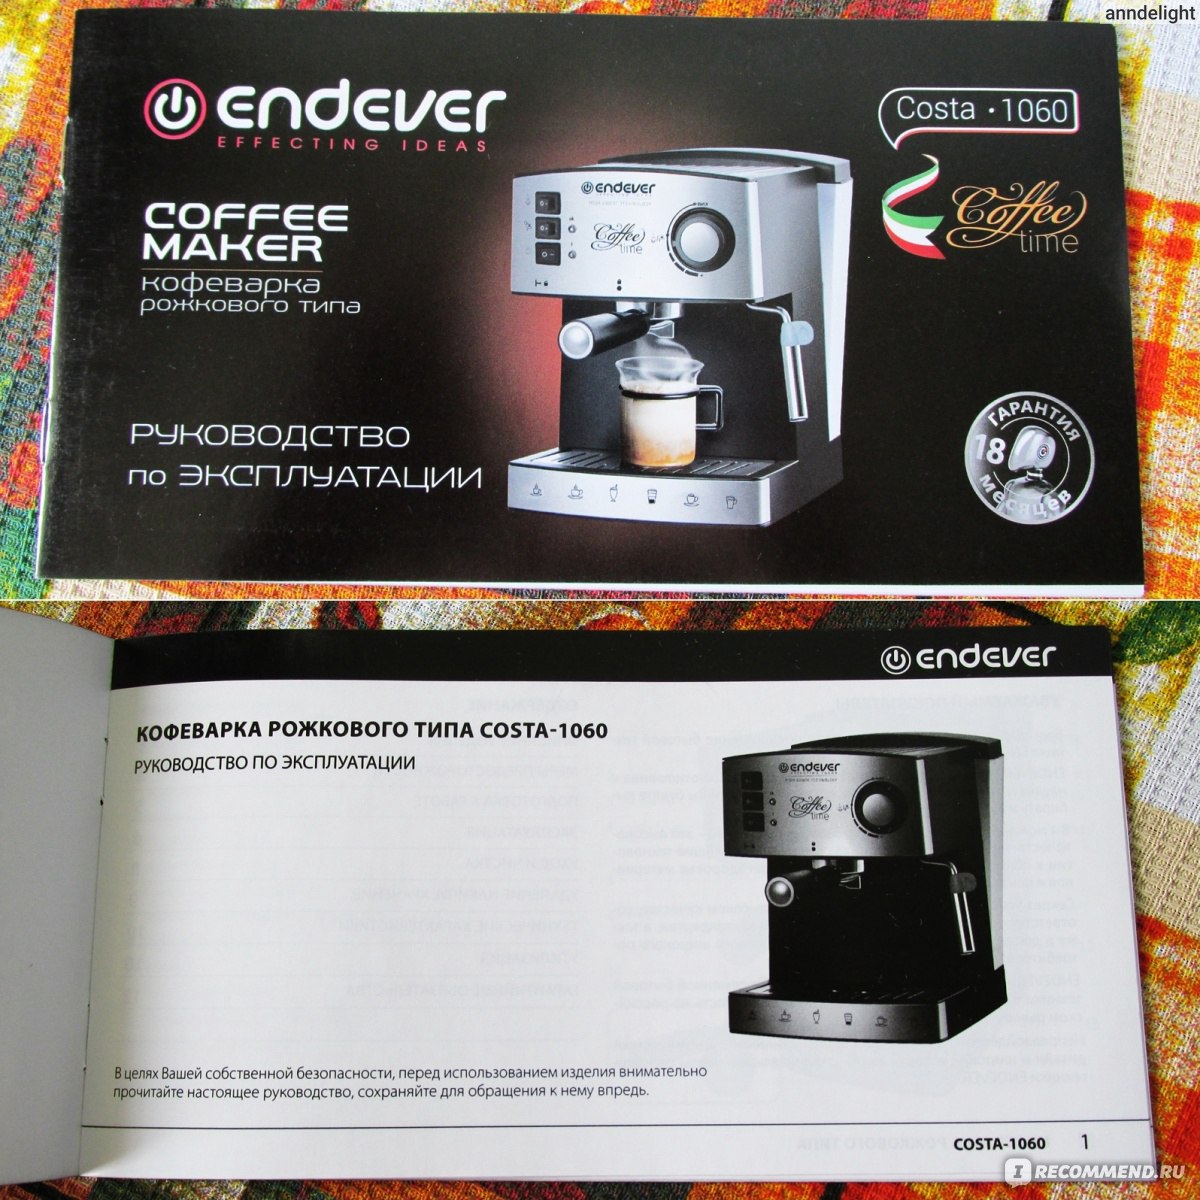 Endever costa 1060